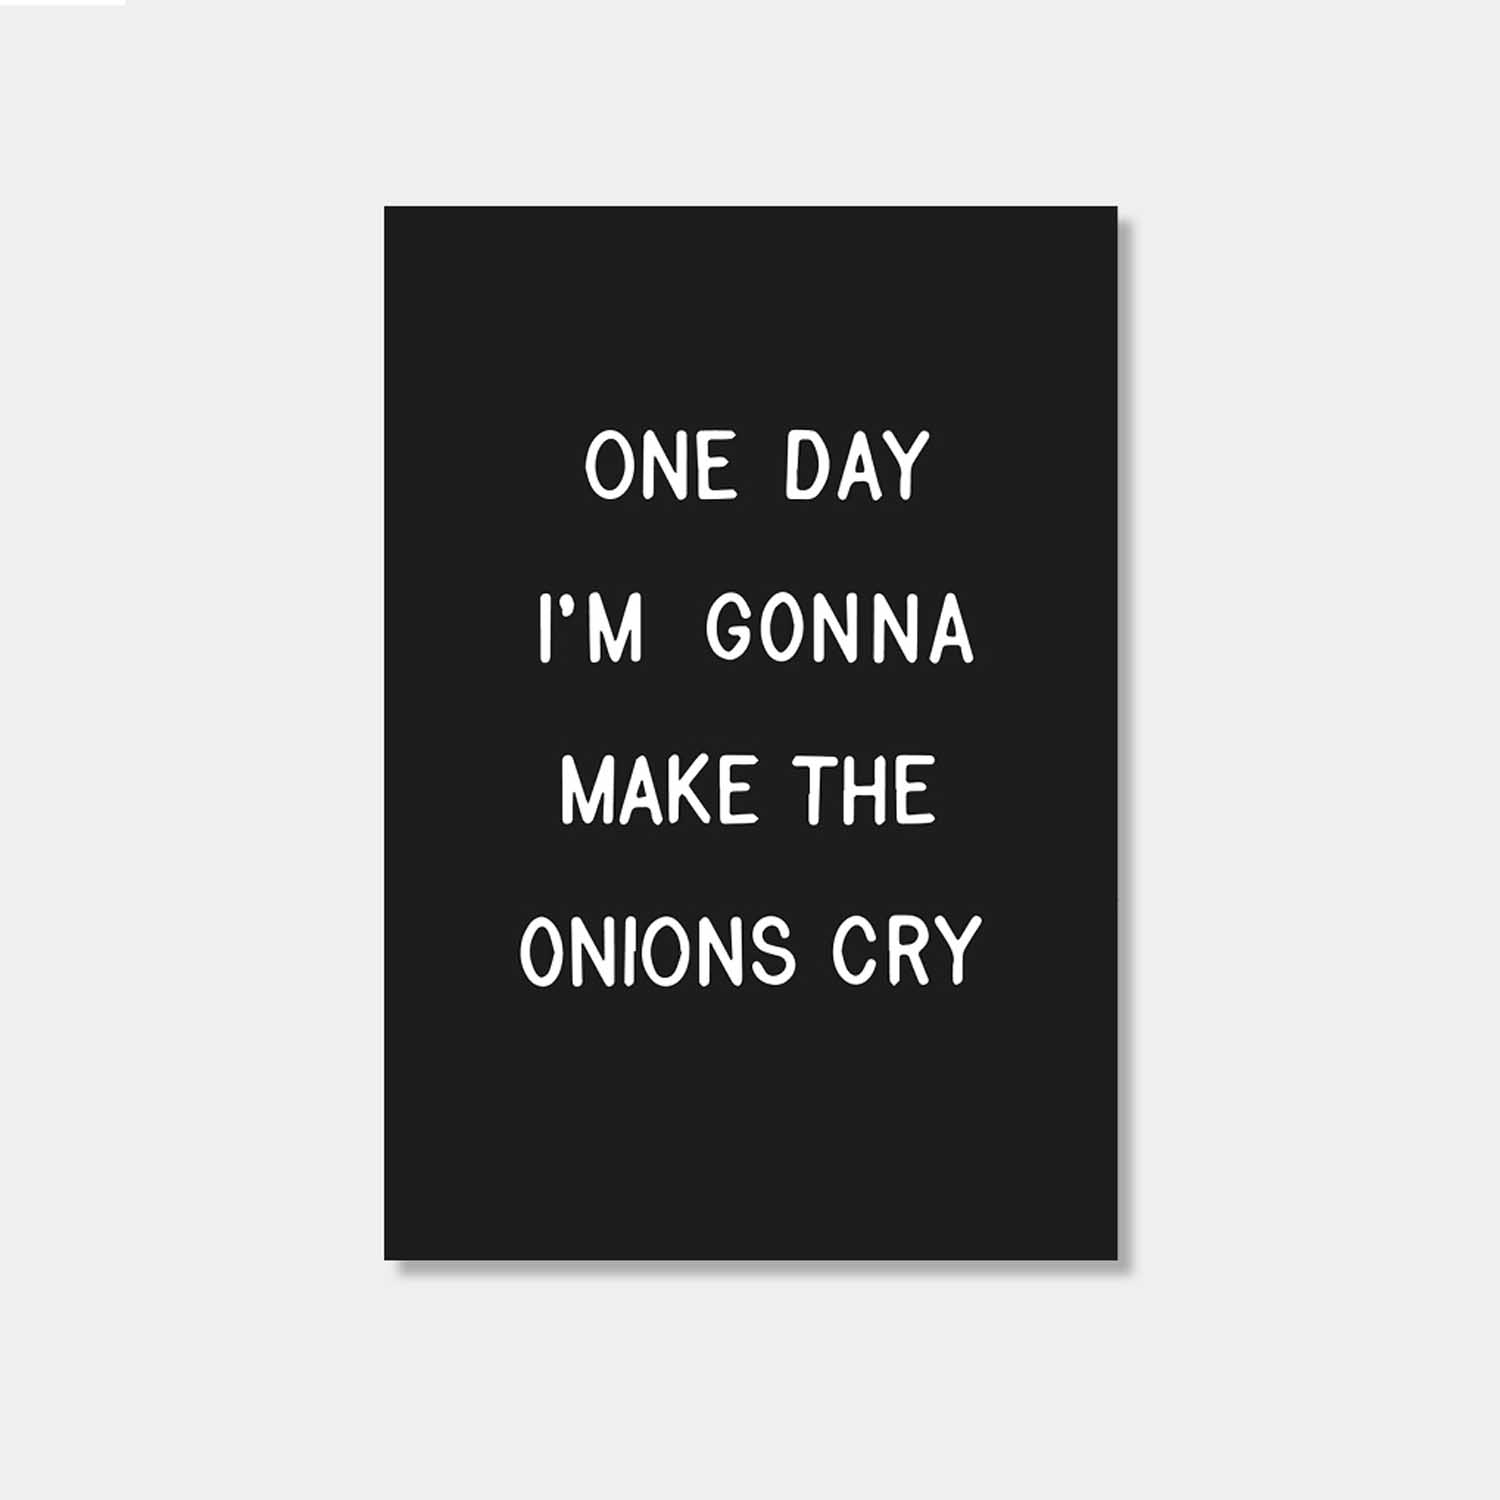 Postkarte - One day I'm gonna make the onions cry